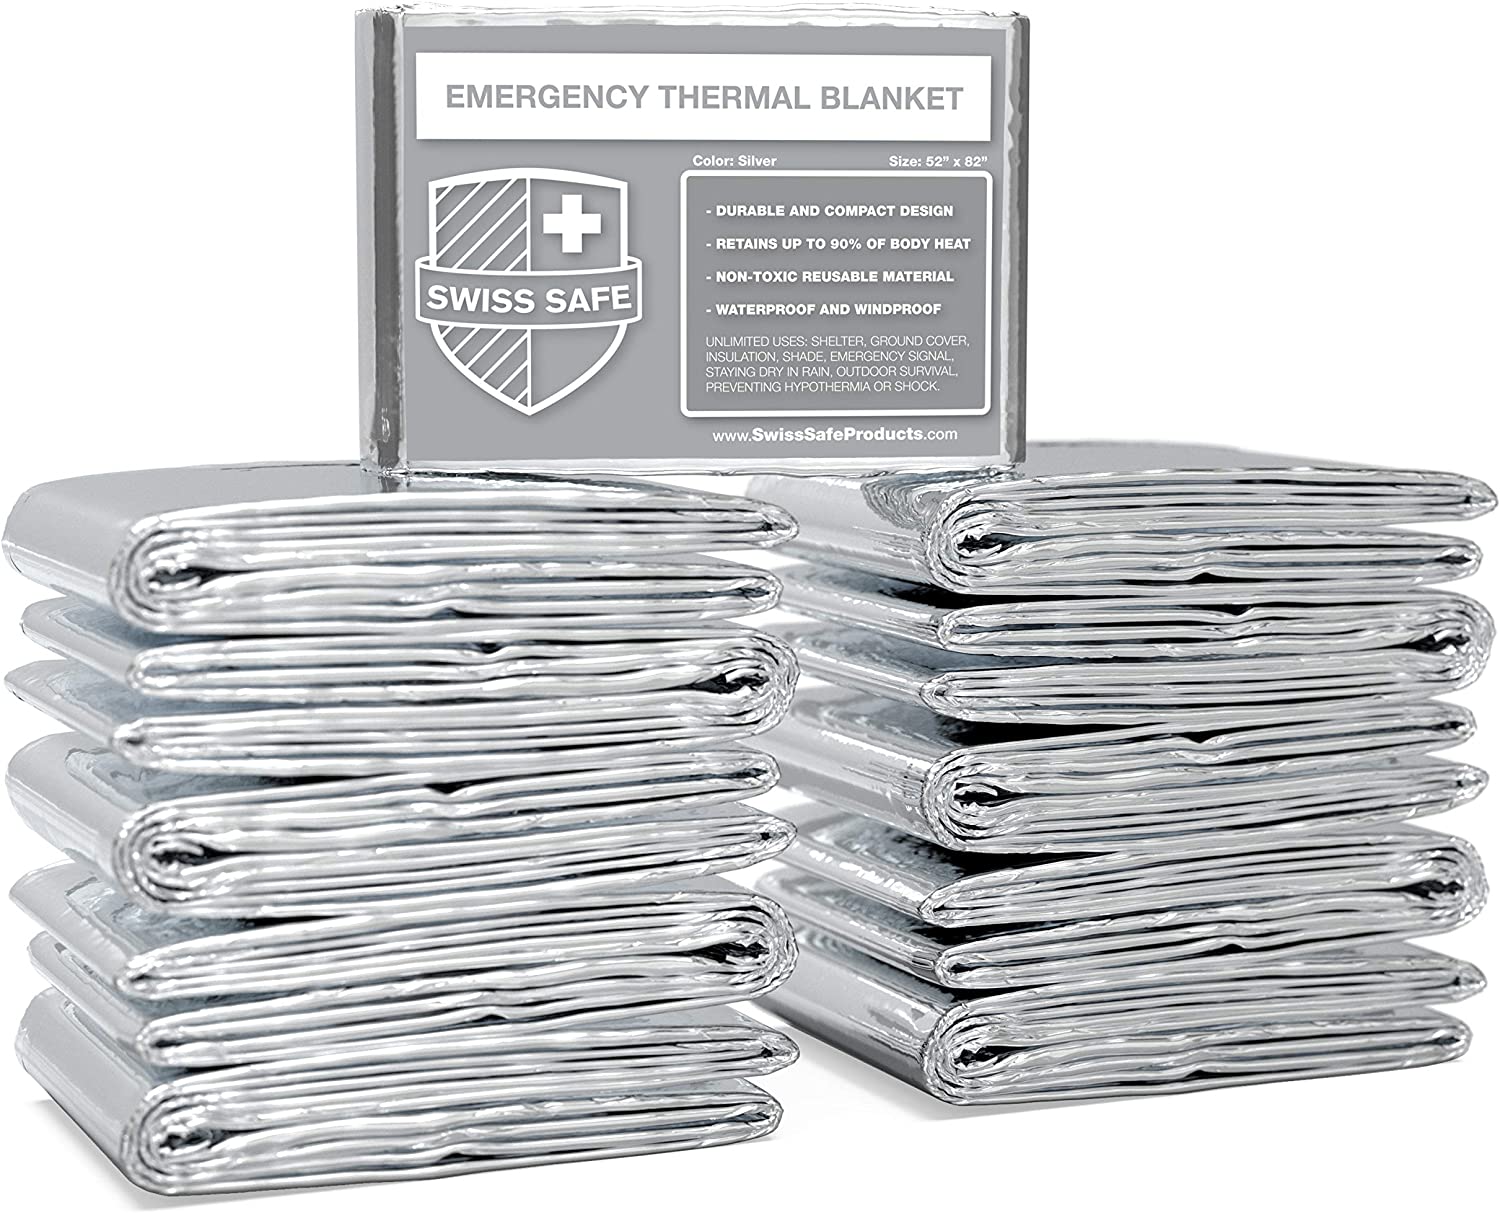 Swiss Safe Emergency Mylar Thermal Blankets, Designed for NASA, Outdoors, Survival, First Aid, Silver, 75 Pack